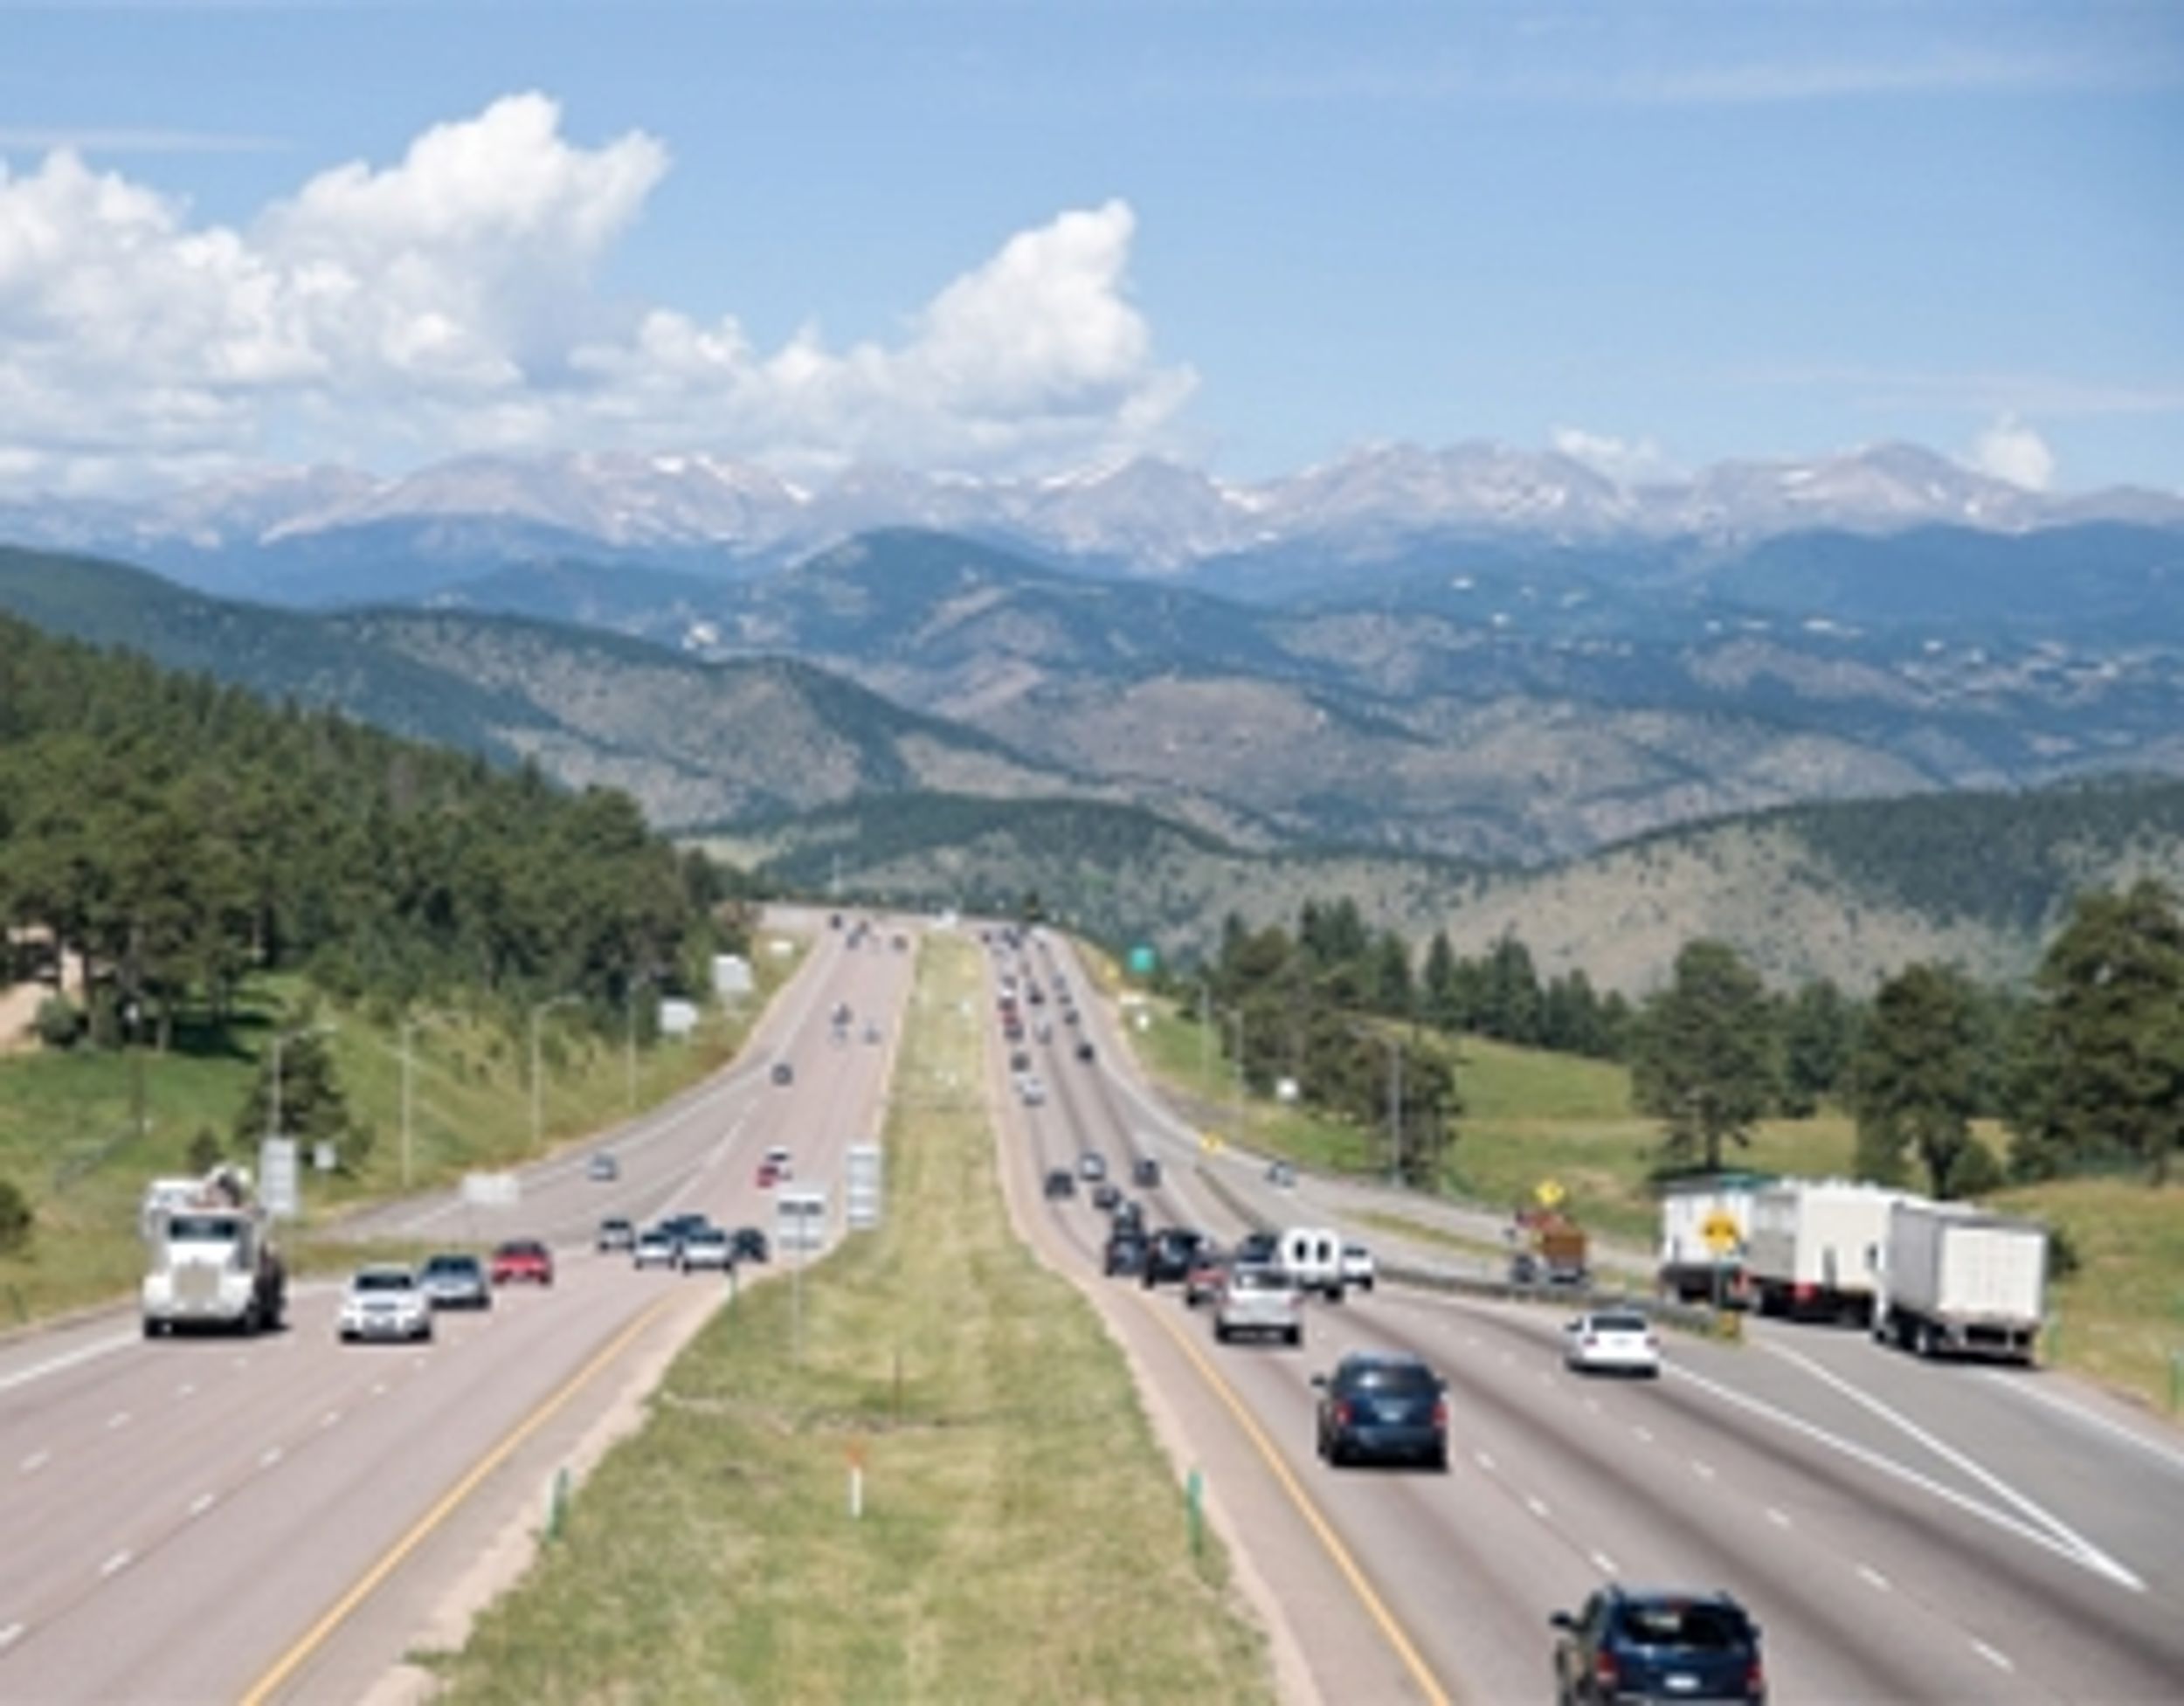 Colorado's Chain Law Starts Sept. 1 for Commercial Vehicle Drivers on I-70